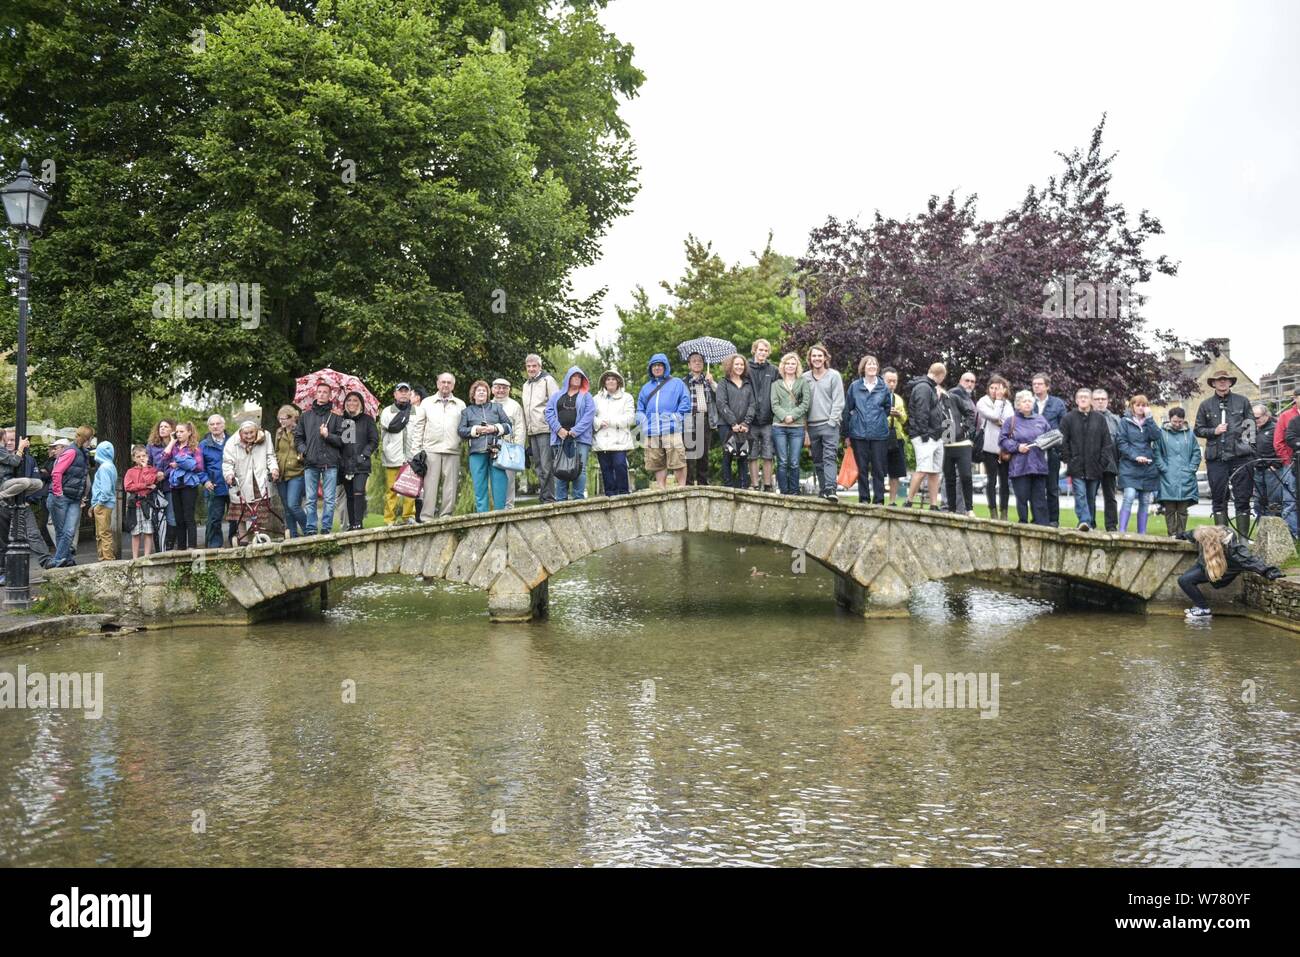 A British tradition, river football at Bourton-on-the-Water, Cotswolds August 2015. The match is held every August Bank Holiday. The game is a five-a-side football match, but in the River Windrush that runs through the town. Residents and visitors line the waters edge and bridges to get the best seats, but risk getting a soaking if the action comes too close. In 2015 British celebrithy, Griff Rhys Jones, took part during the filming for A Great British Adventure. Credit: Michael Scott/Alamy Live News Stock Photo